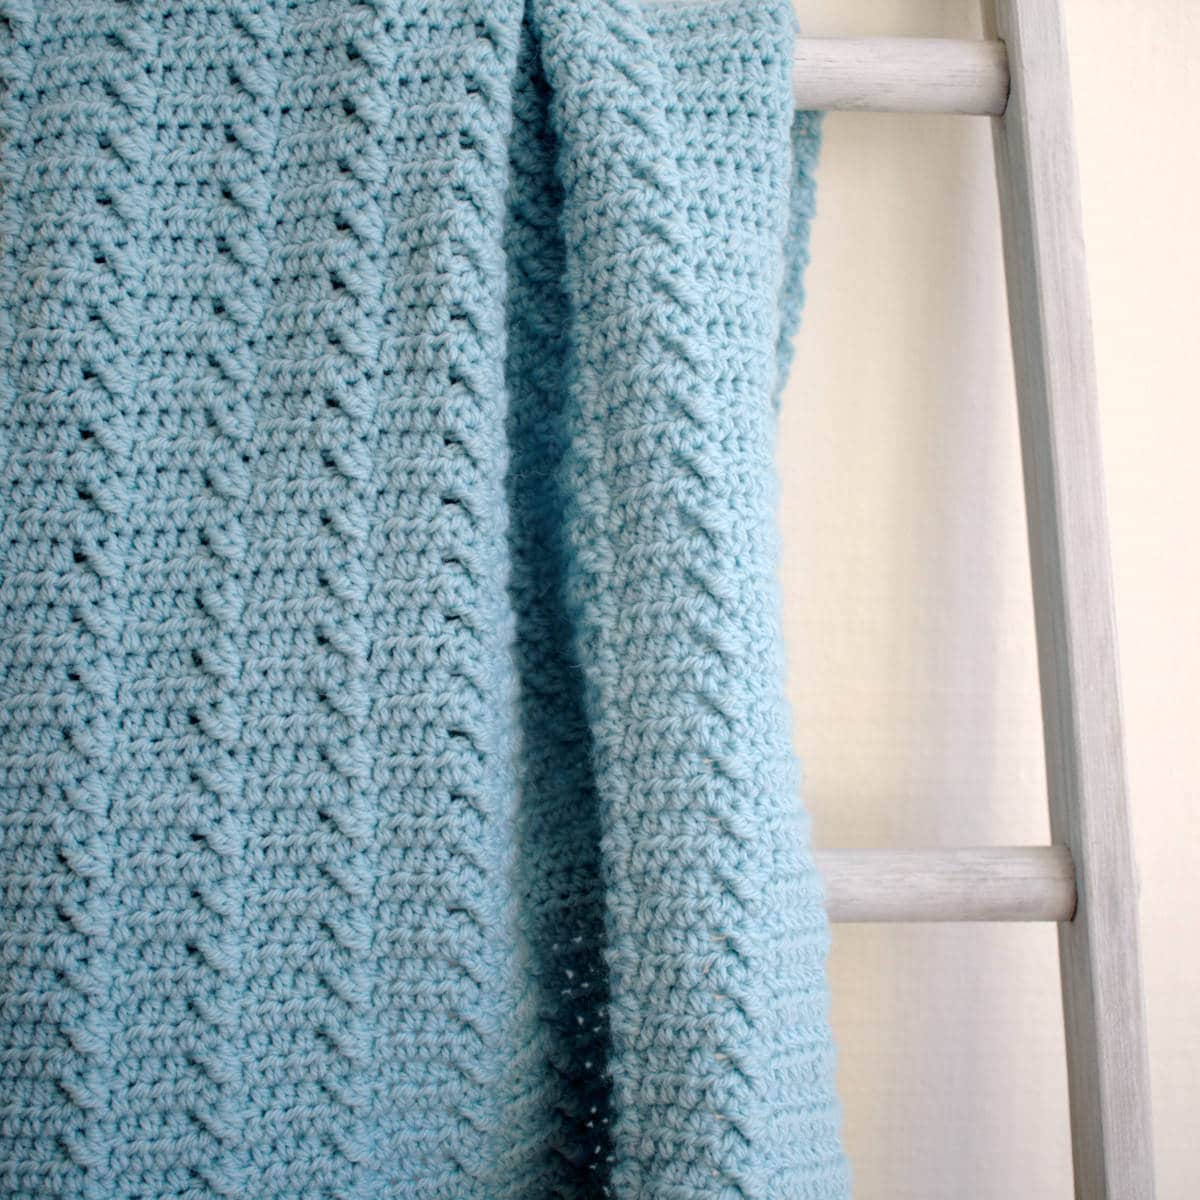 Lakeshore Ripples Blanket with Post Stitch Texture